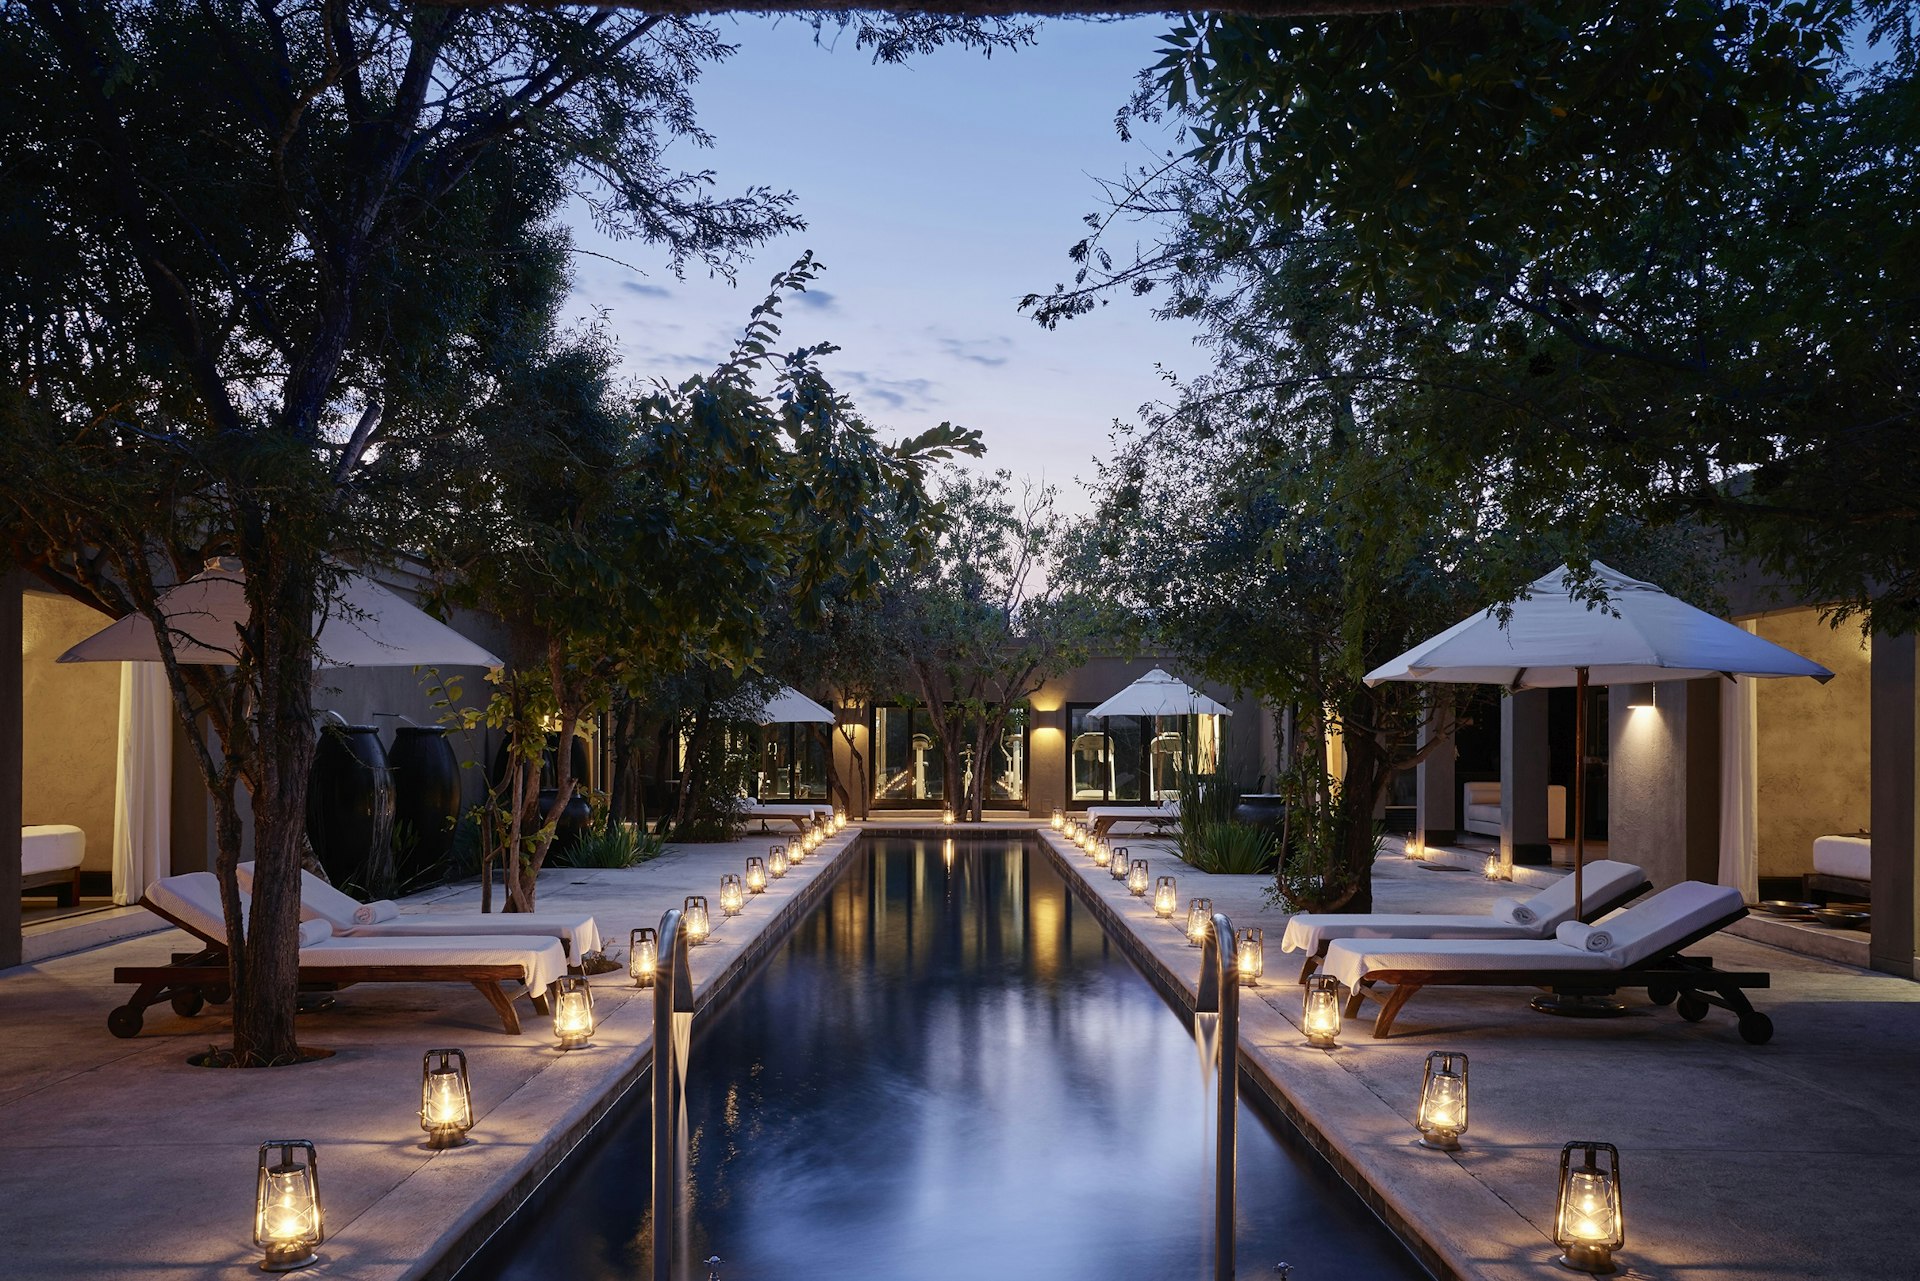 A swimming pool is surrounded by deck chairs and umbrellas at dusk. Lamps line the side of the pool. 